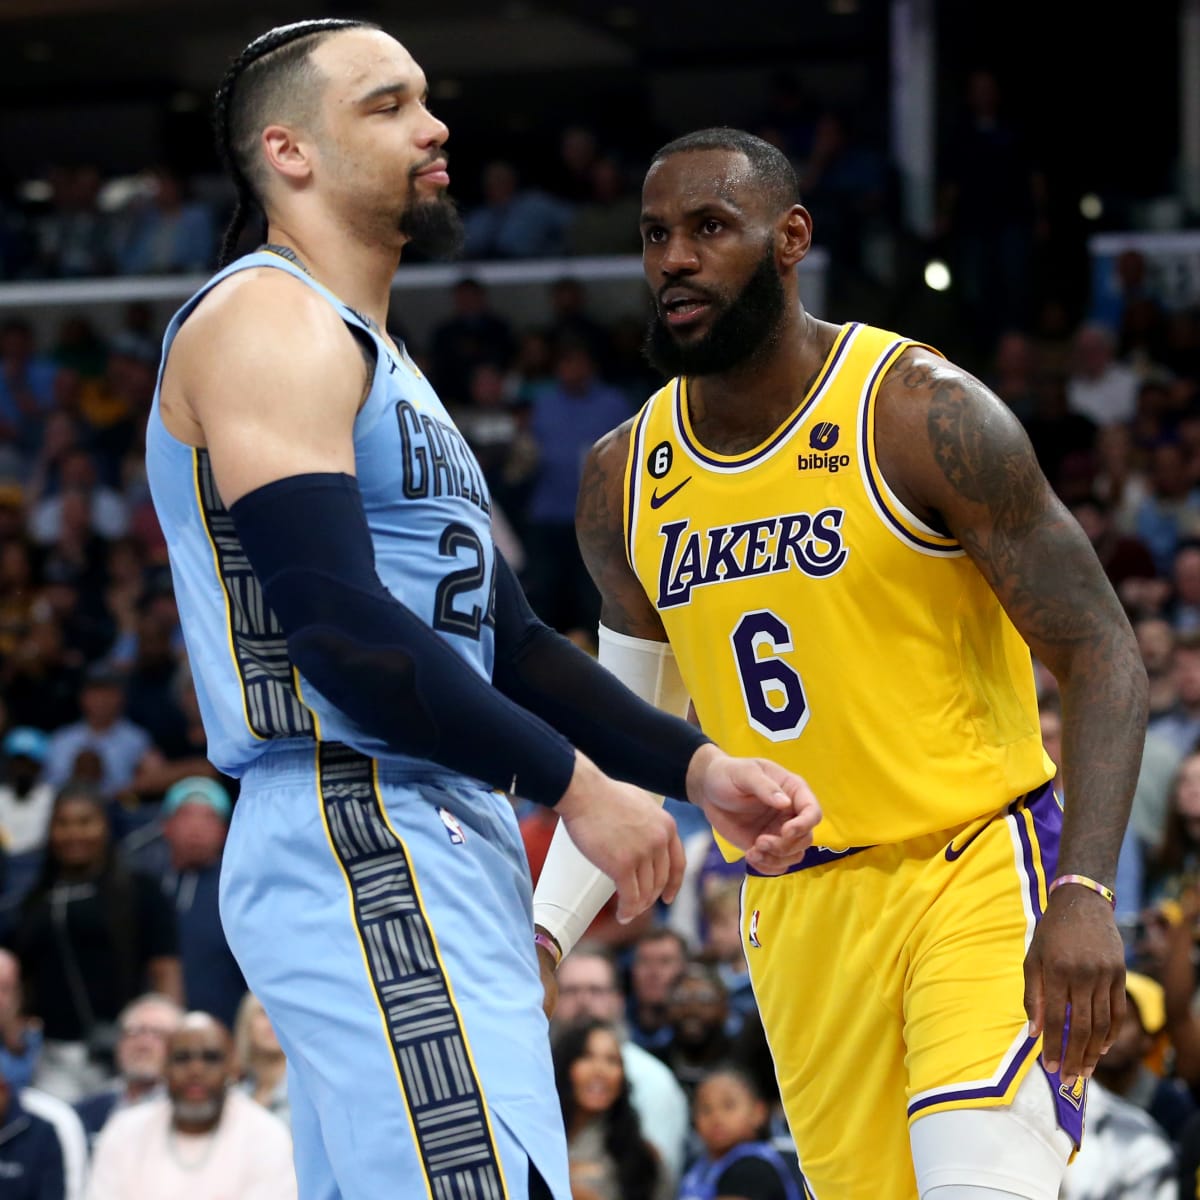 Grizzlies' Dillon Brooks Calls LeBron James 'Old' After Playoff Win